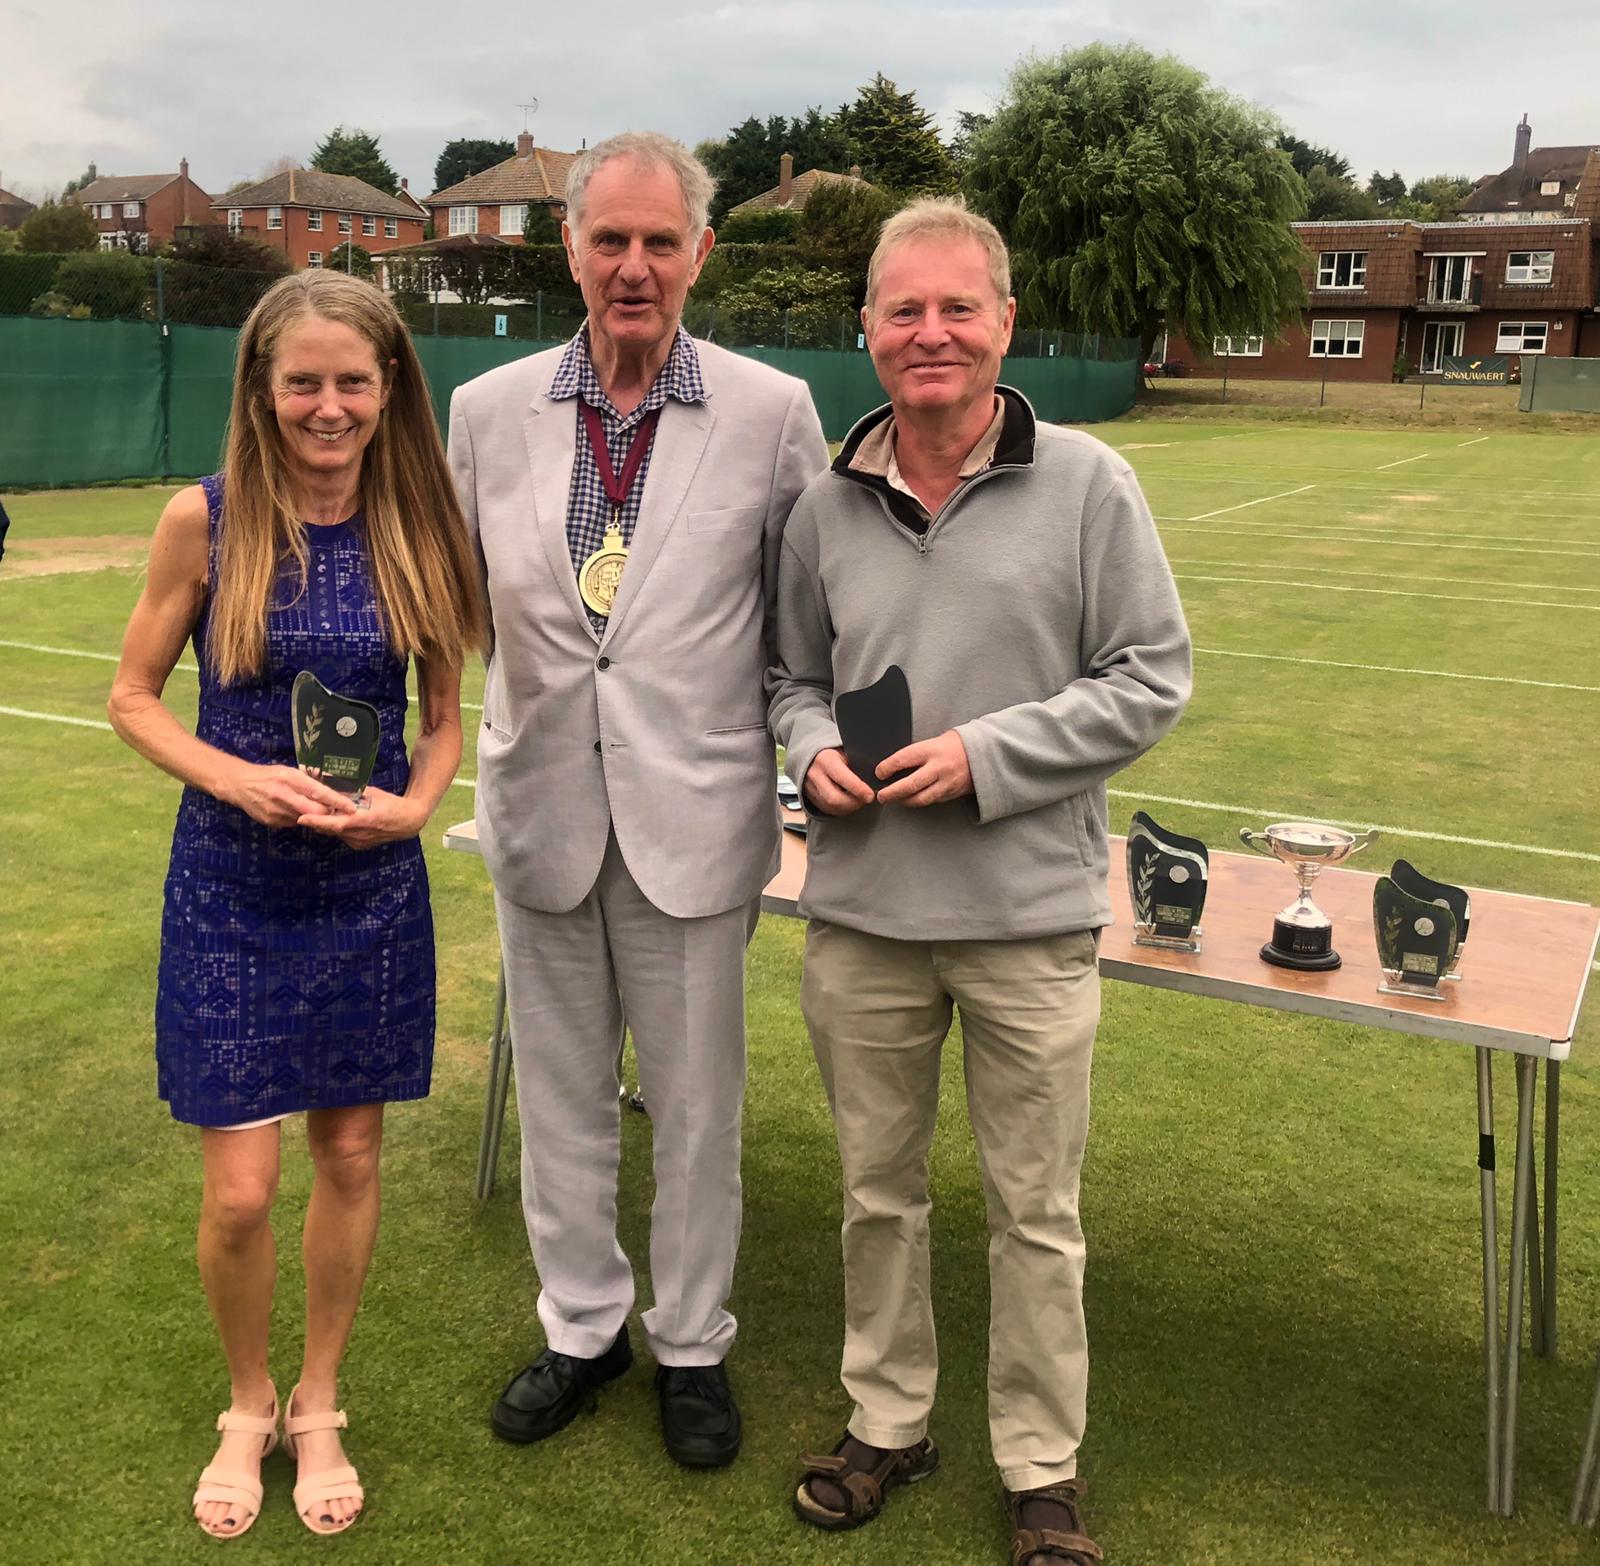 Lynn and Richard Sexton – Runners up in the 55 or Over Mixed Doubles